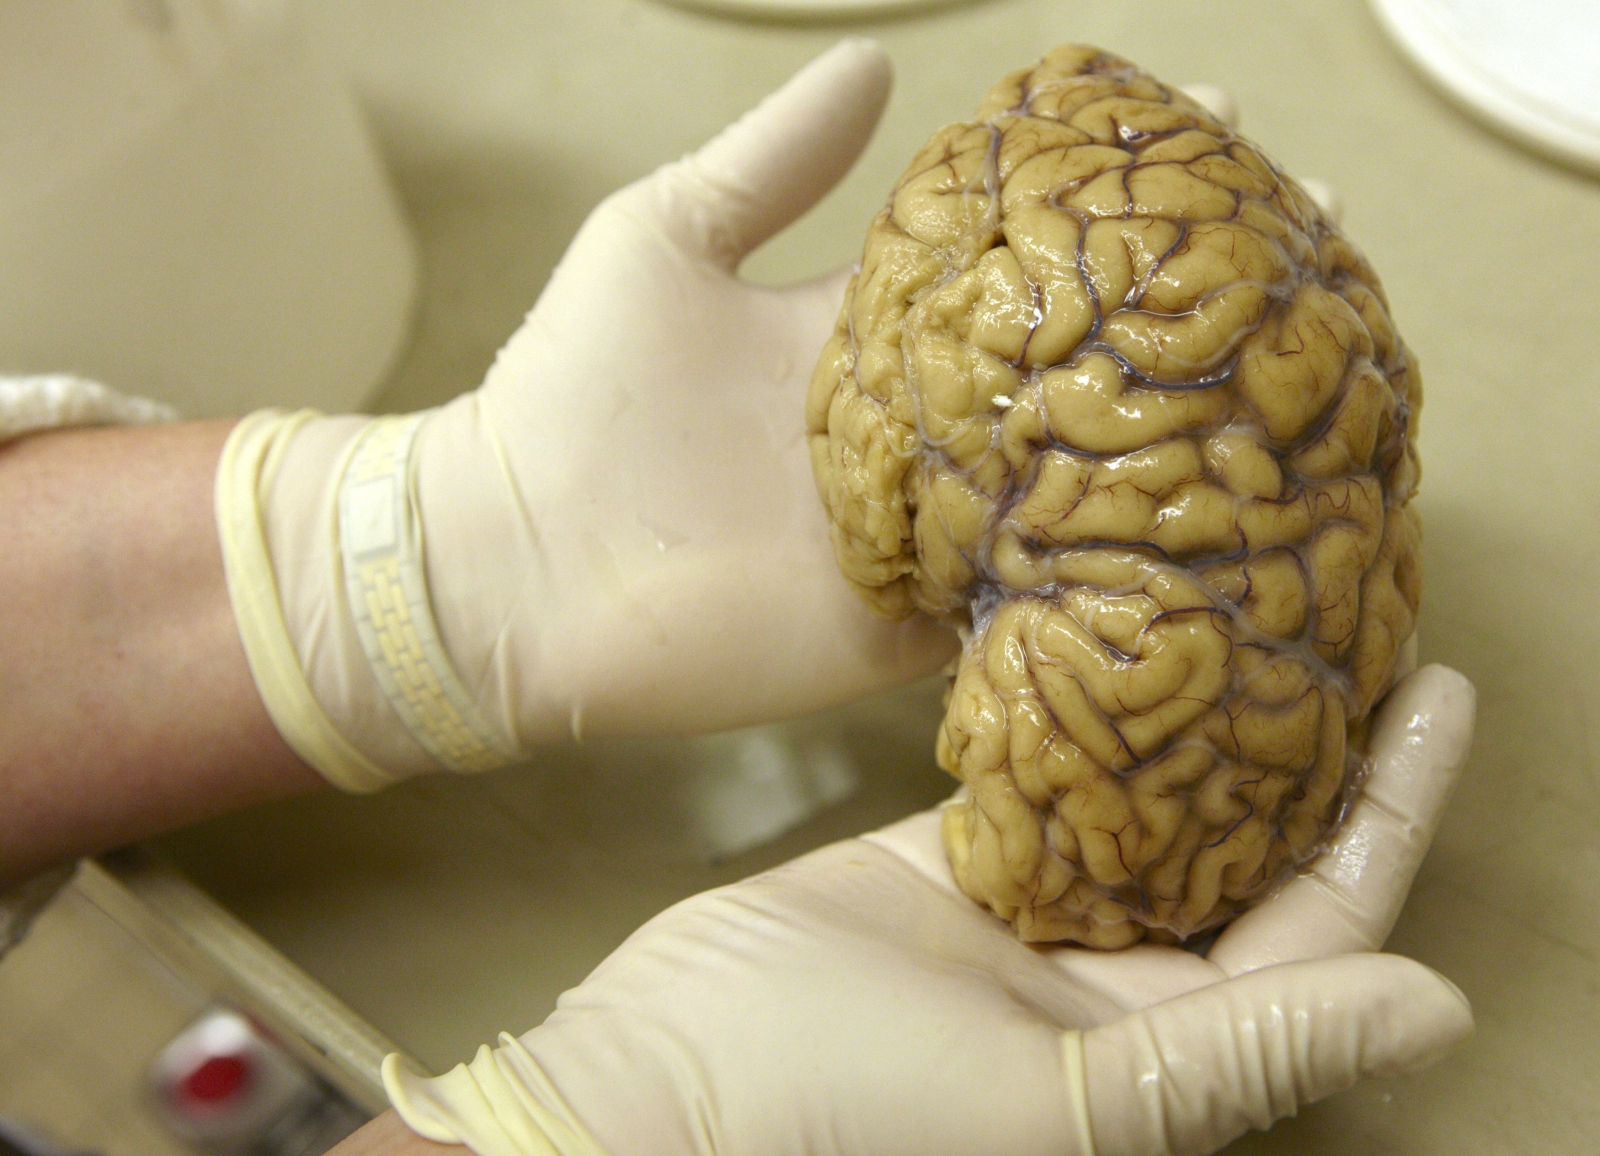 Brain scans show how people justify killing other humans